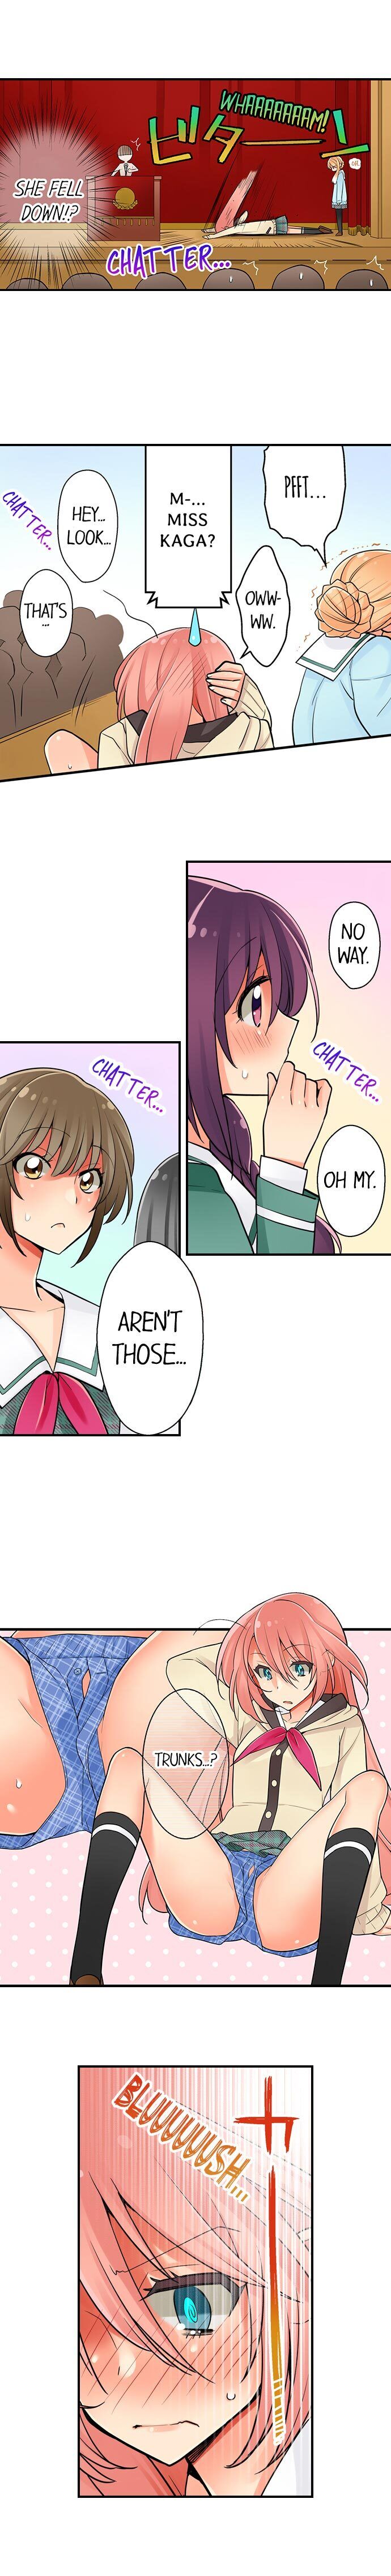 Me (a Guy)… Lesbian!? - Chapter 1 Page 6